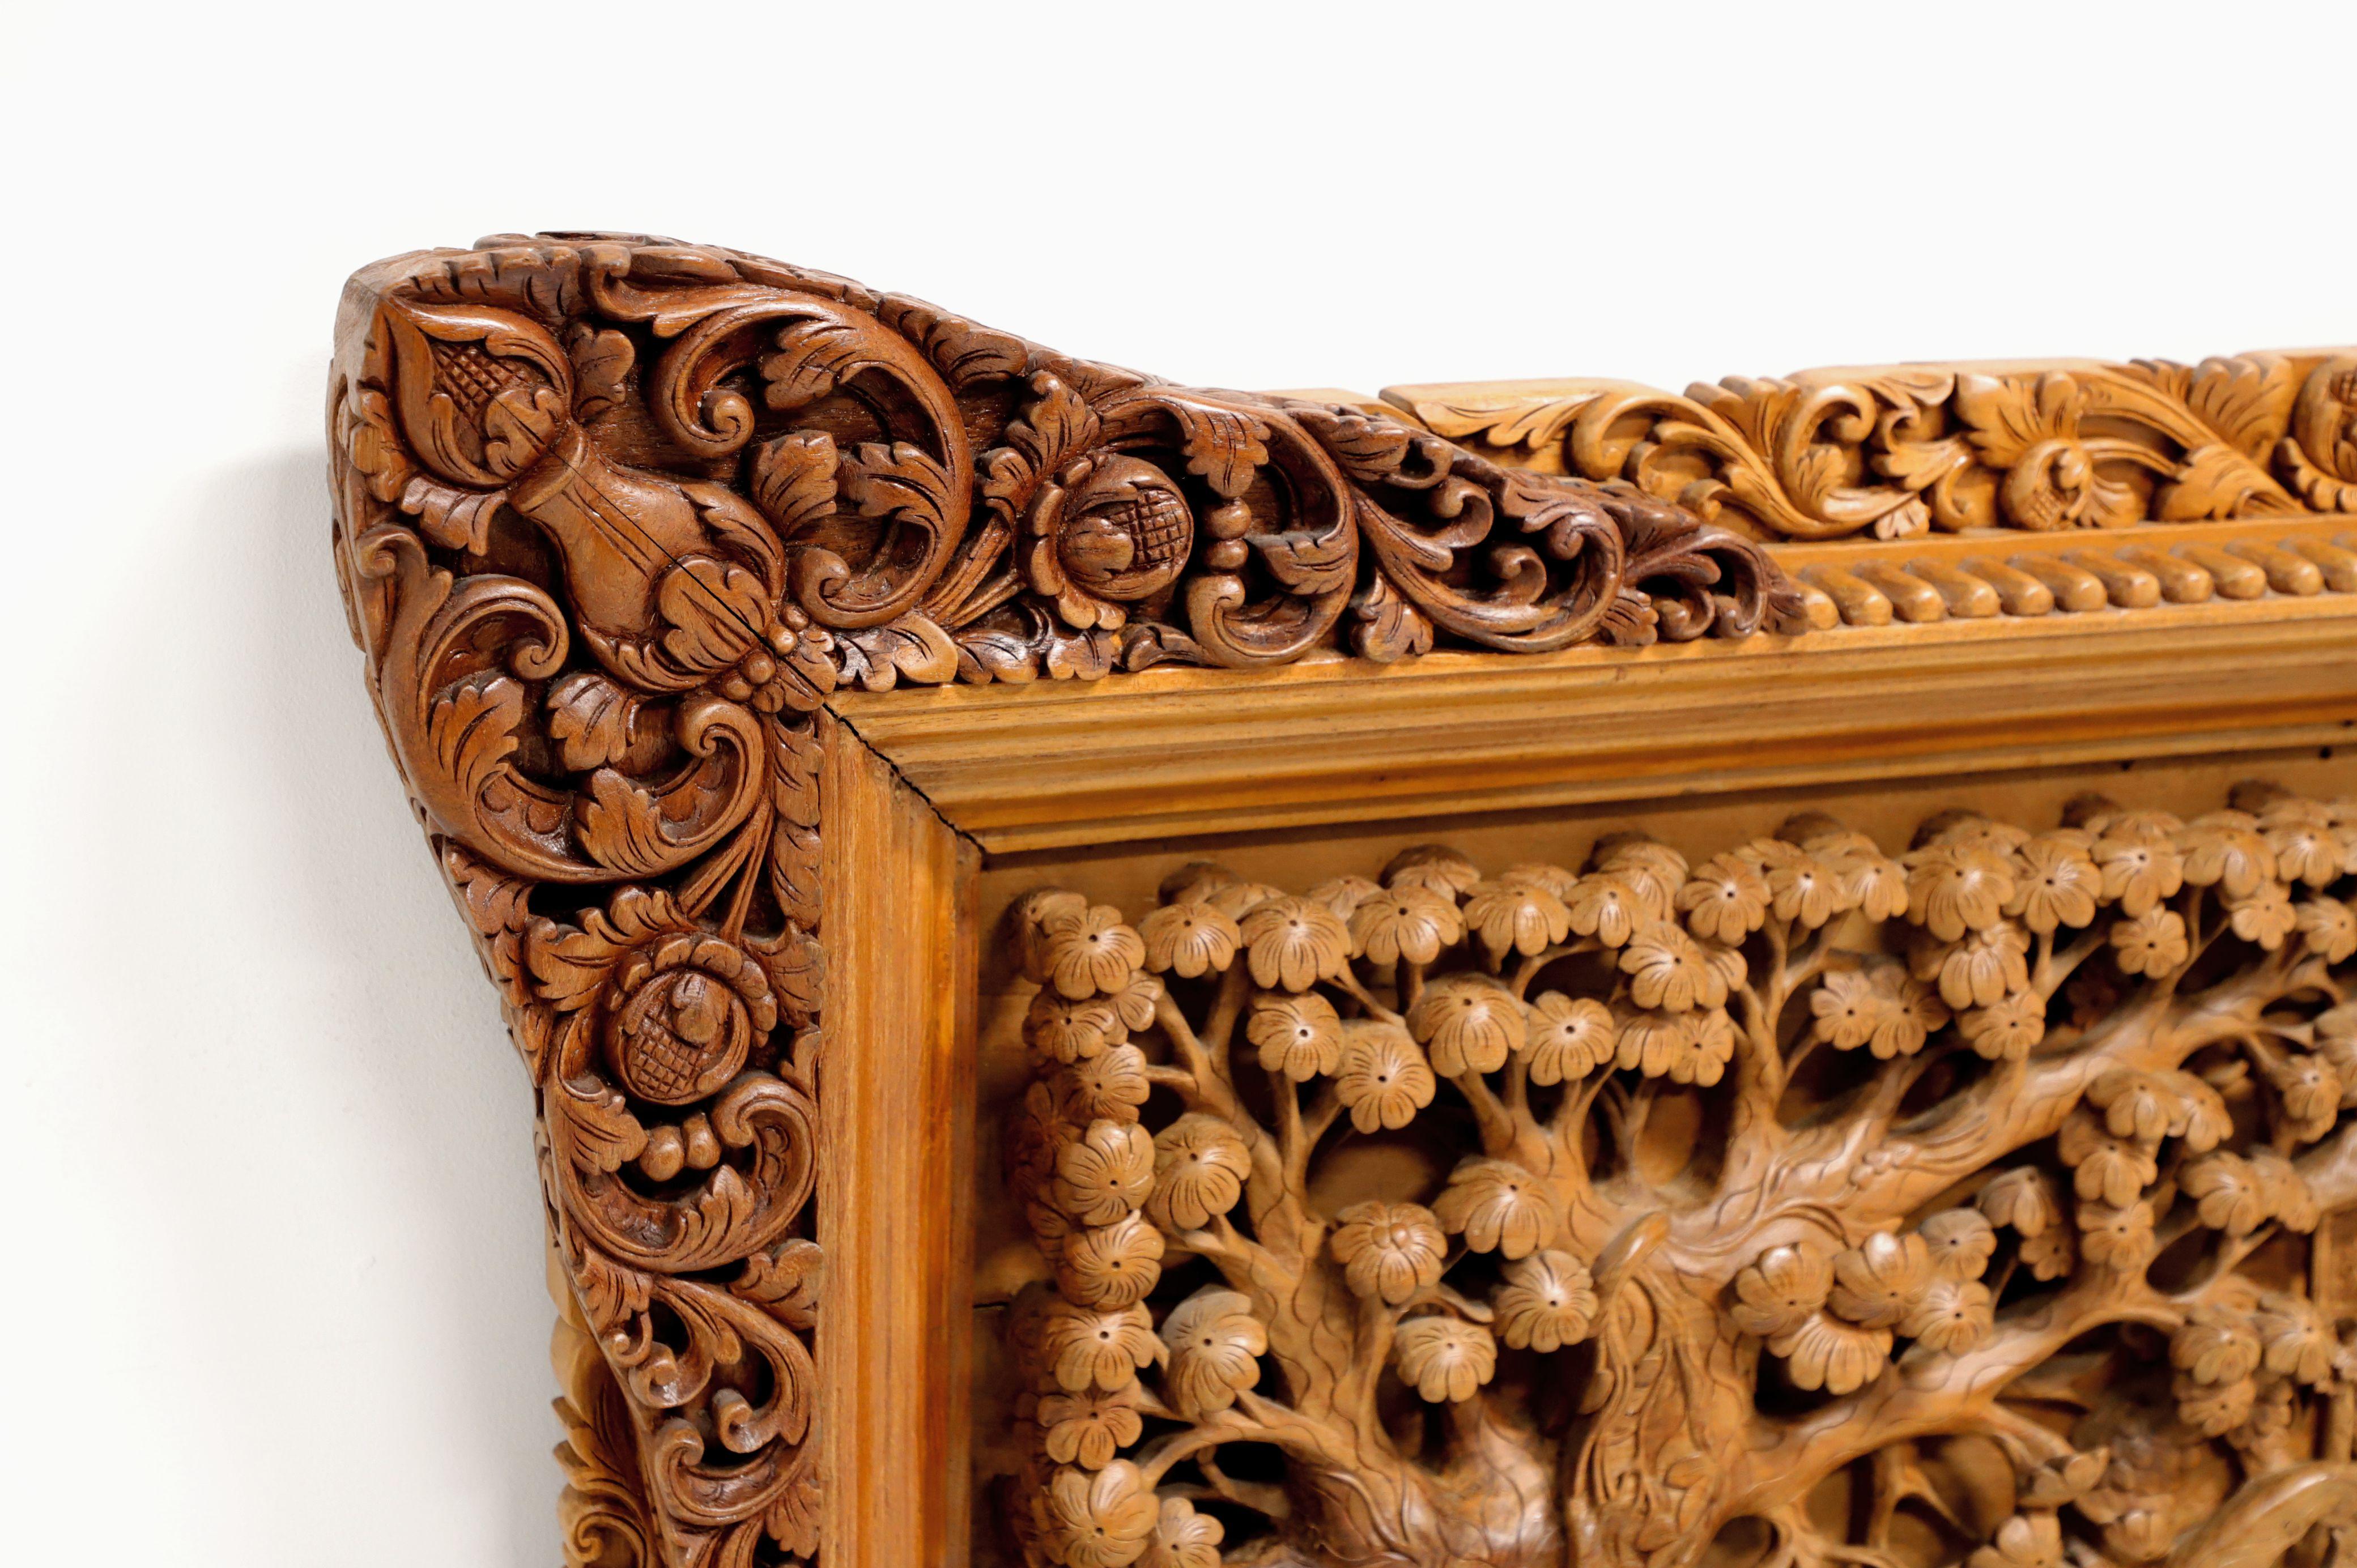 An original, massively scaled, hand carved teak art panel. Untitled, possibly depicting a Balinese royal procession. Intricate in detail and workmanship. Presented in an equally detailed carved teak frame that compliments the panel. A heavy-duty